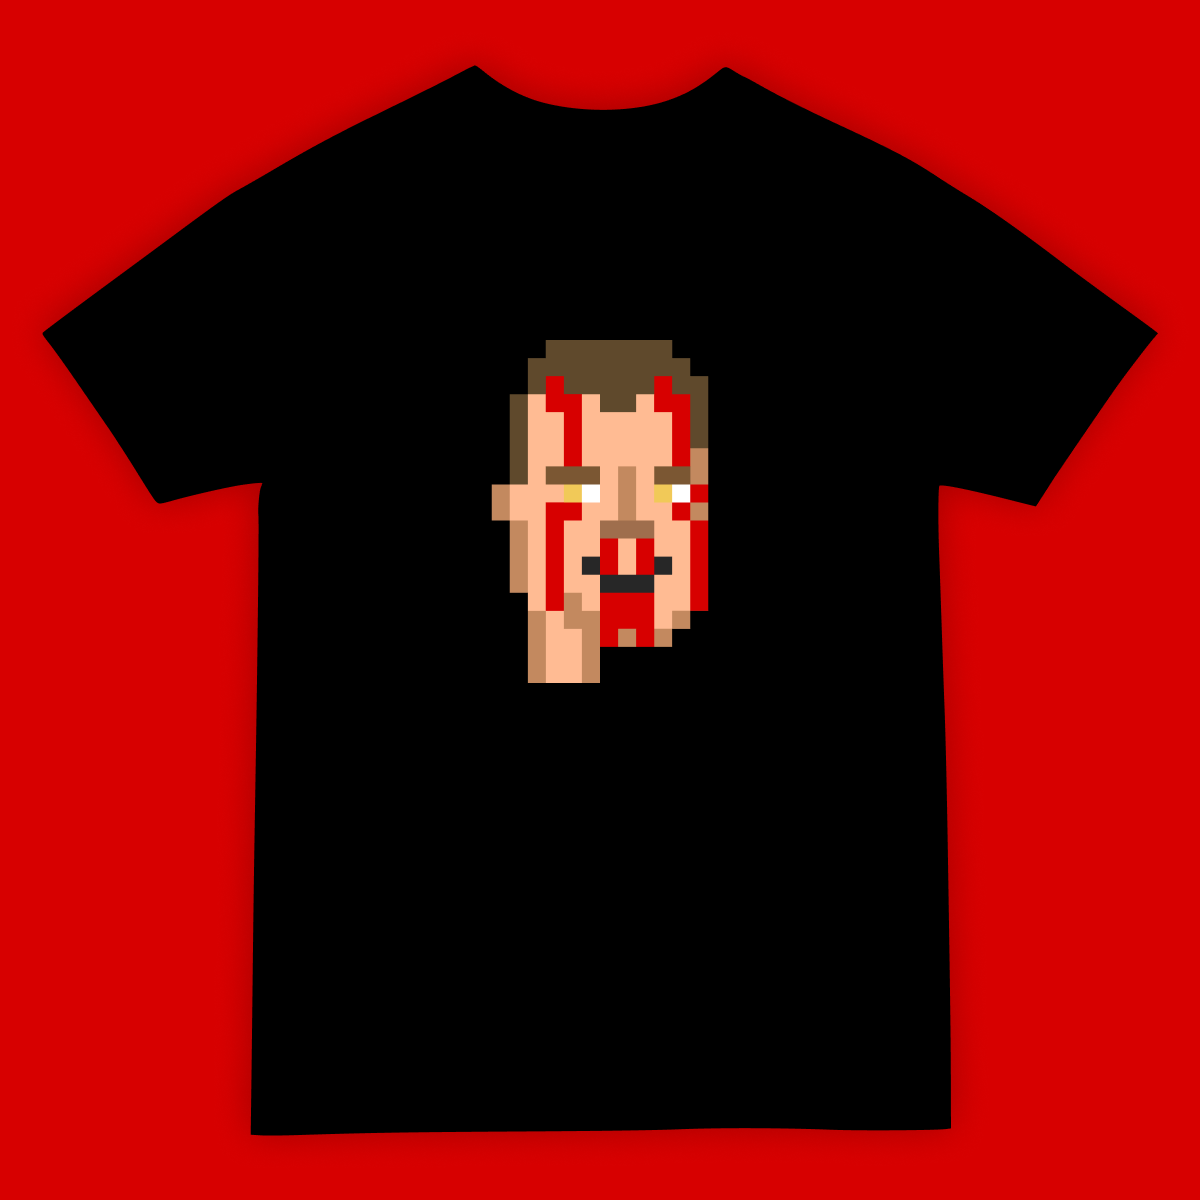 A t-shirt design. A bloody face based on the Doom character, in a pixellated 8-bit style made famous by the NFT crypto punks collection.